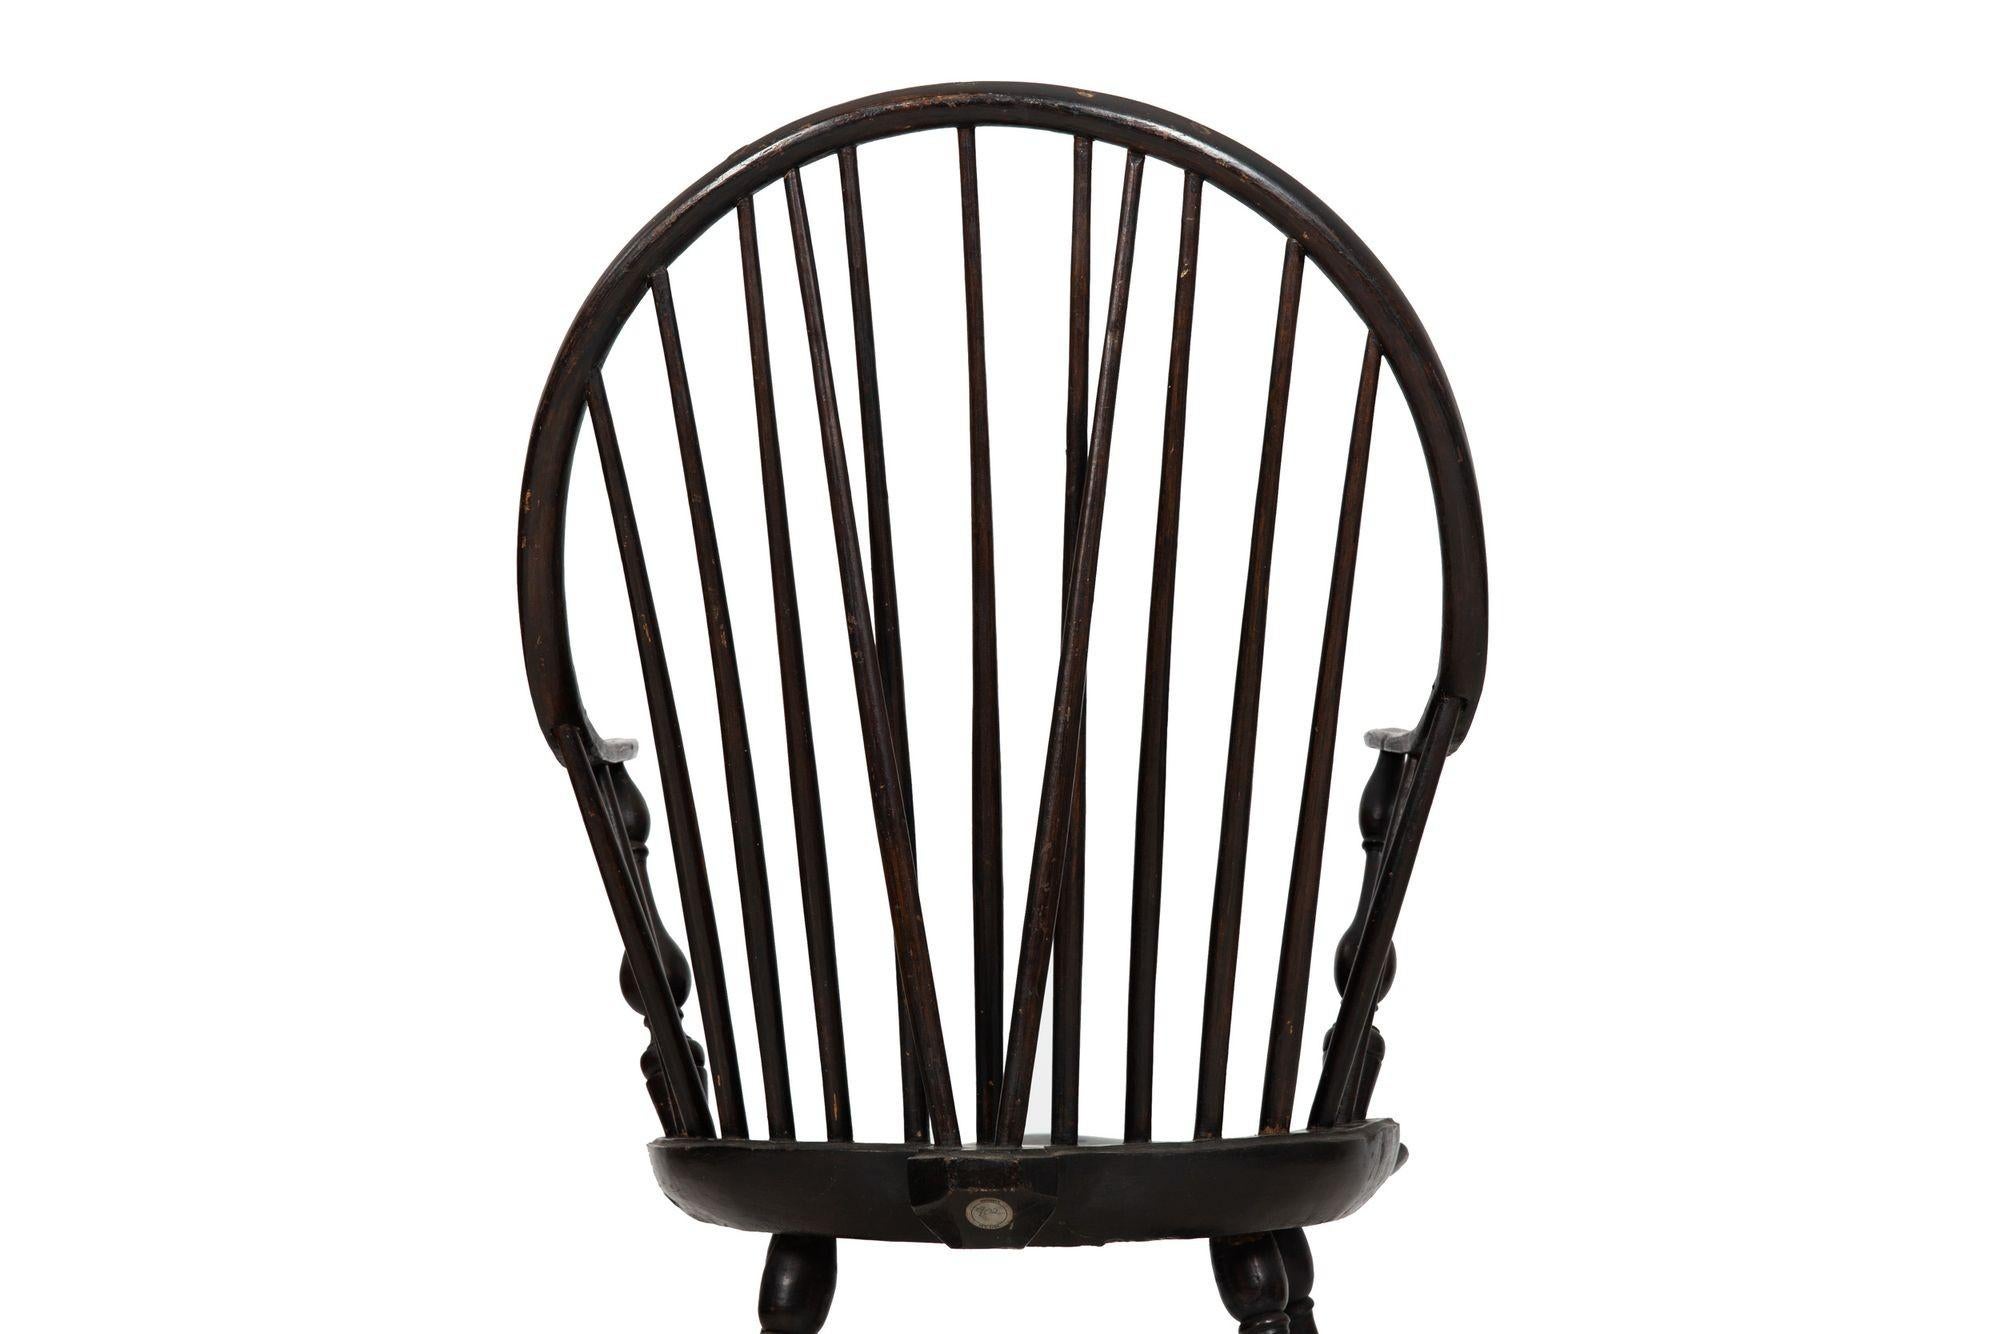 Rare American Brace-Back Continuous Arm Windsor Chair, New York ca. 1790 1